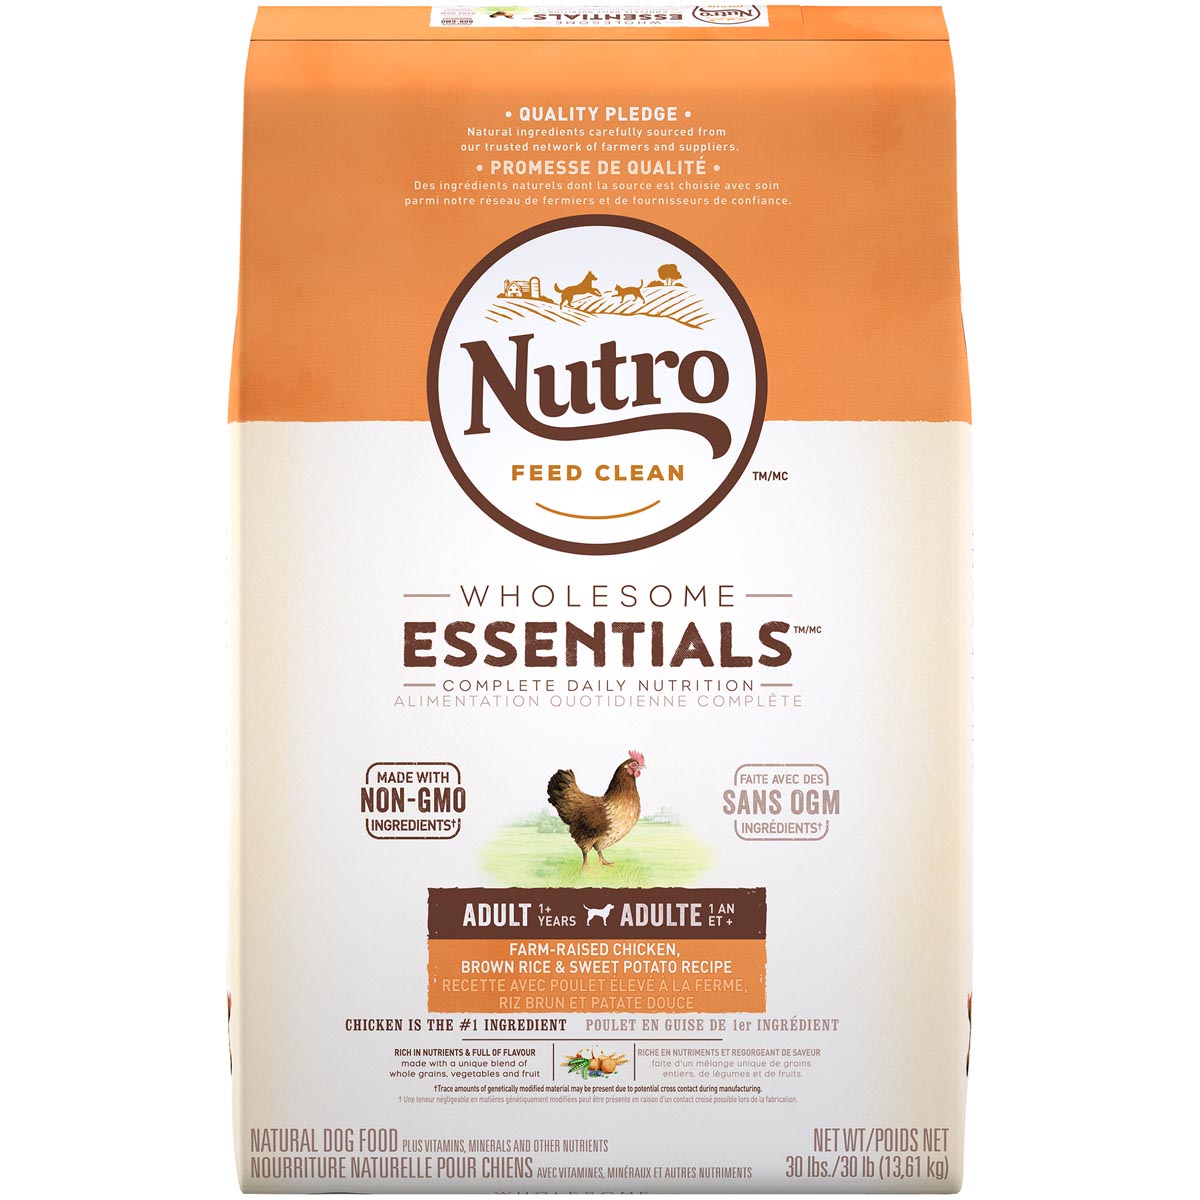 Nutro Feed Clean Wholesome Essentials Farm-Raised Chicken, Brown Rice & Sweet Potato Recipe Adult 1+